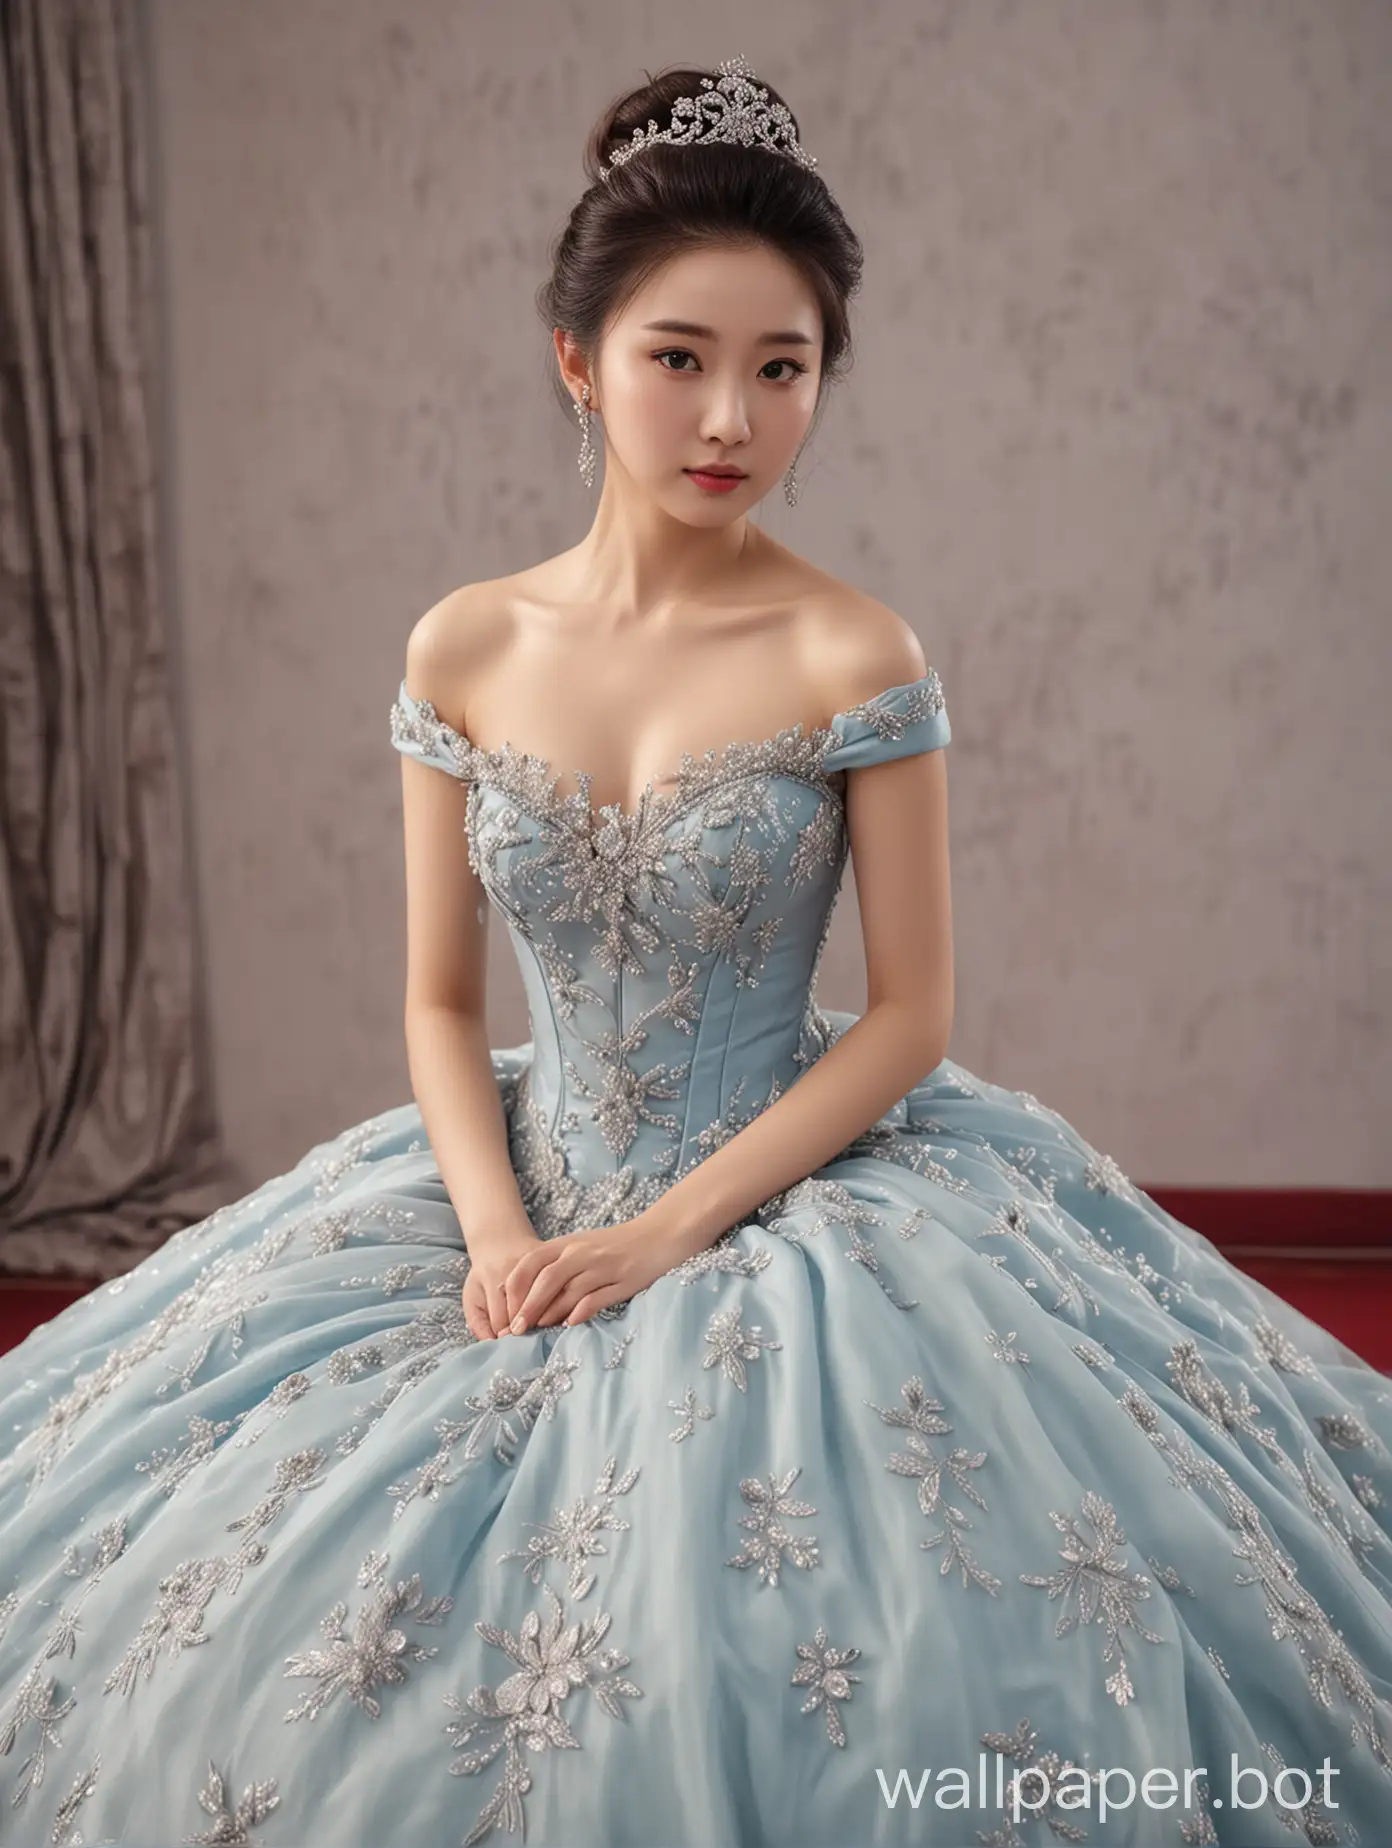 Chinese-Actress-in-Elegant-Ball-Gown